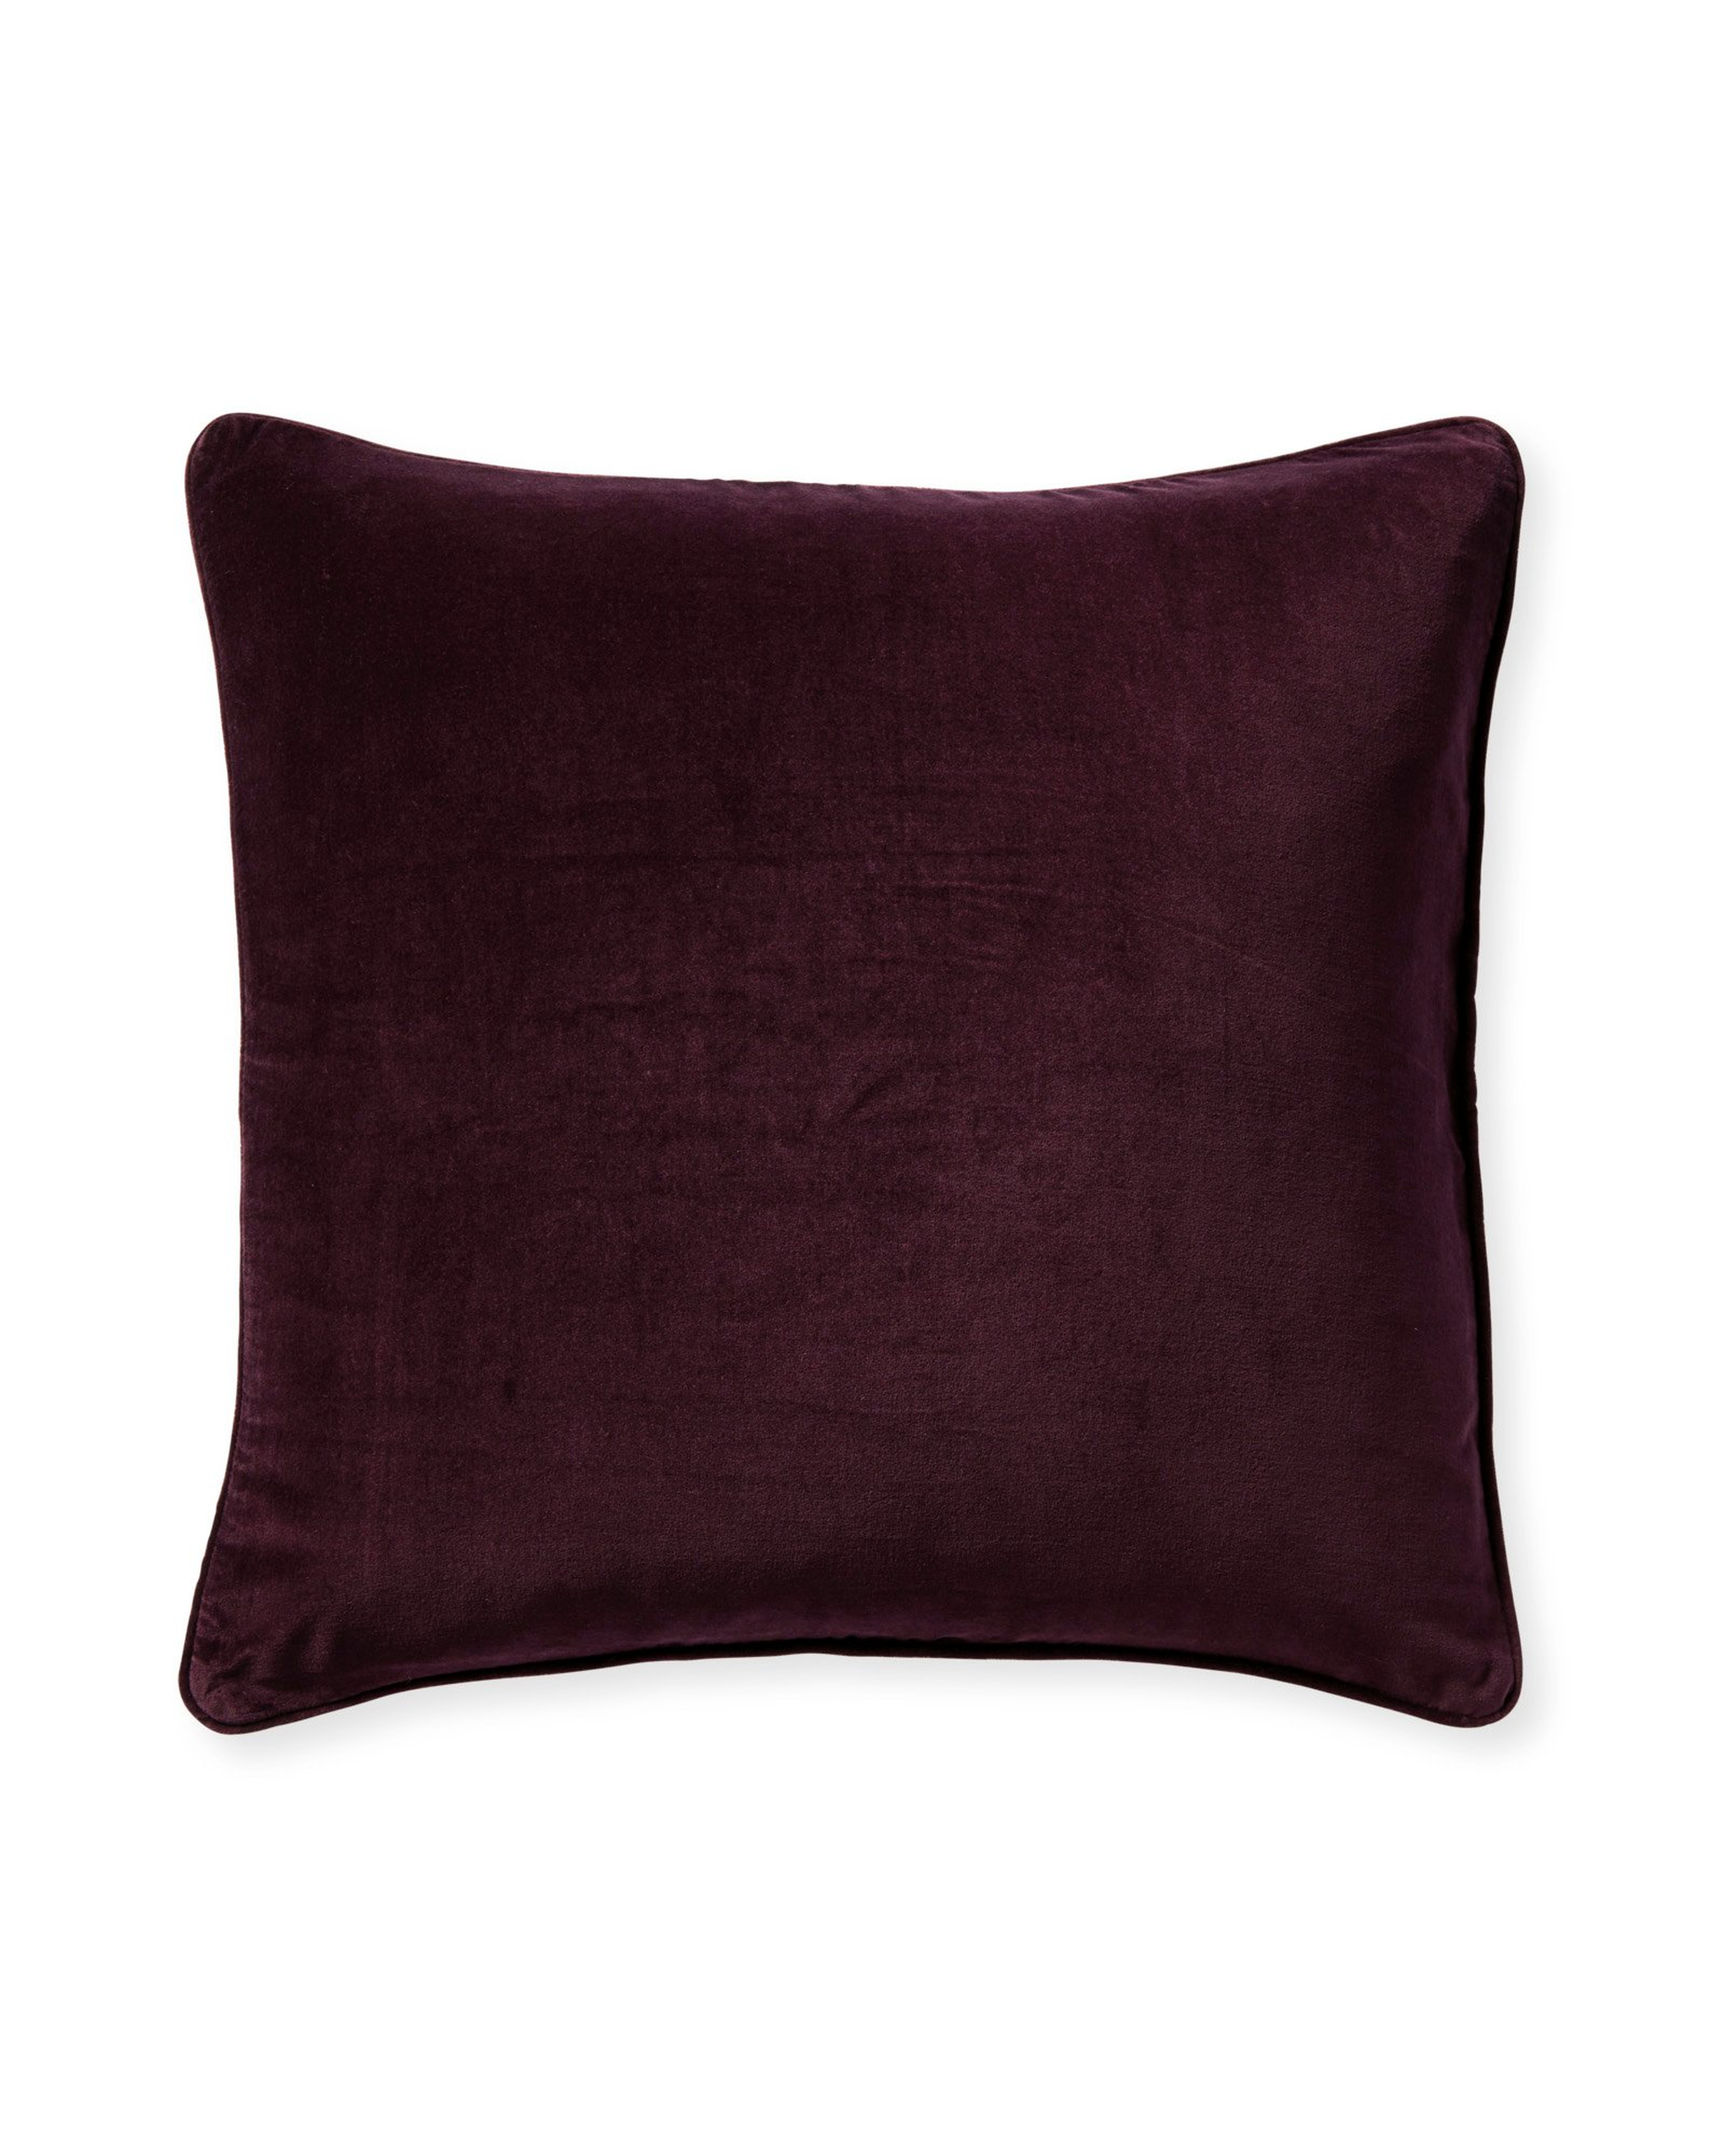 Kingsbury Pillow Cover in Merlot - 22"x22" - Serena and Lily